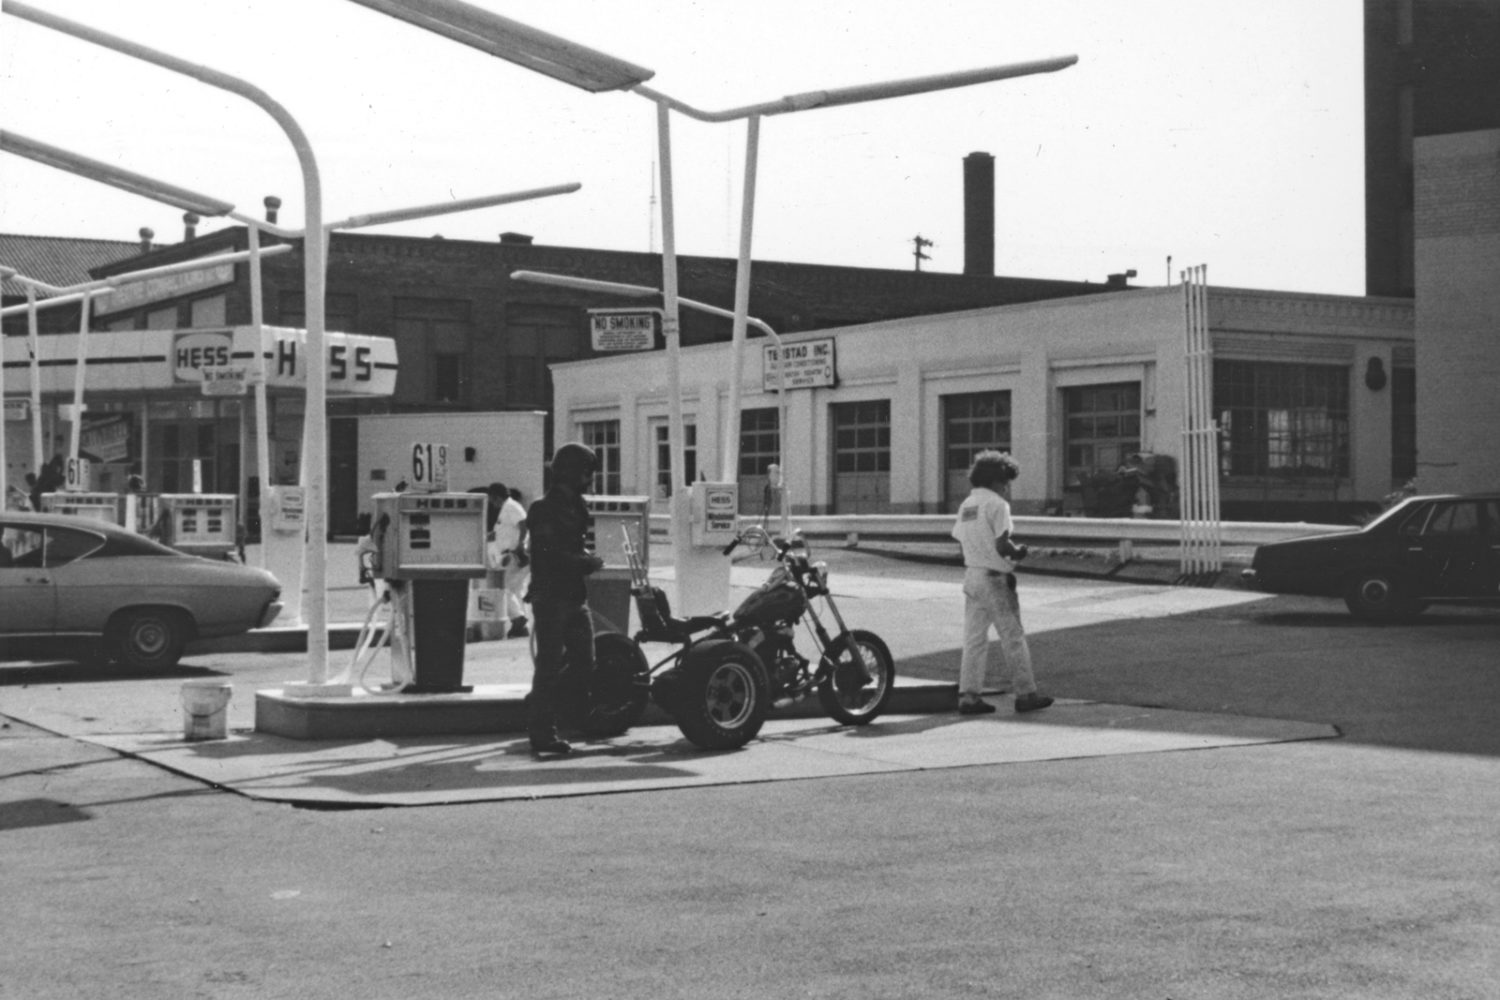 Hess Gas Station on Monroe Avenue, Rochester, New York - photo by Paul Dodd 1976